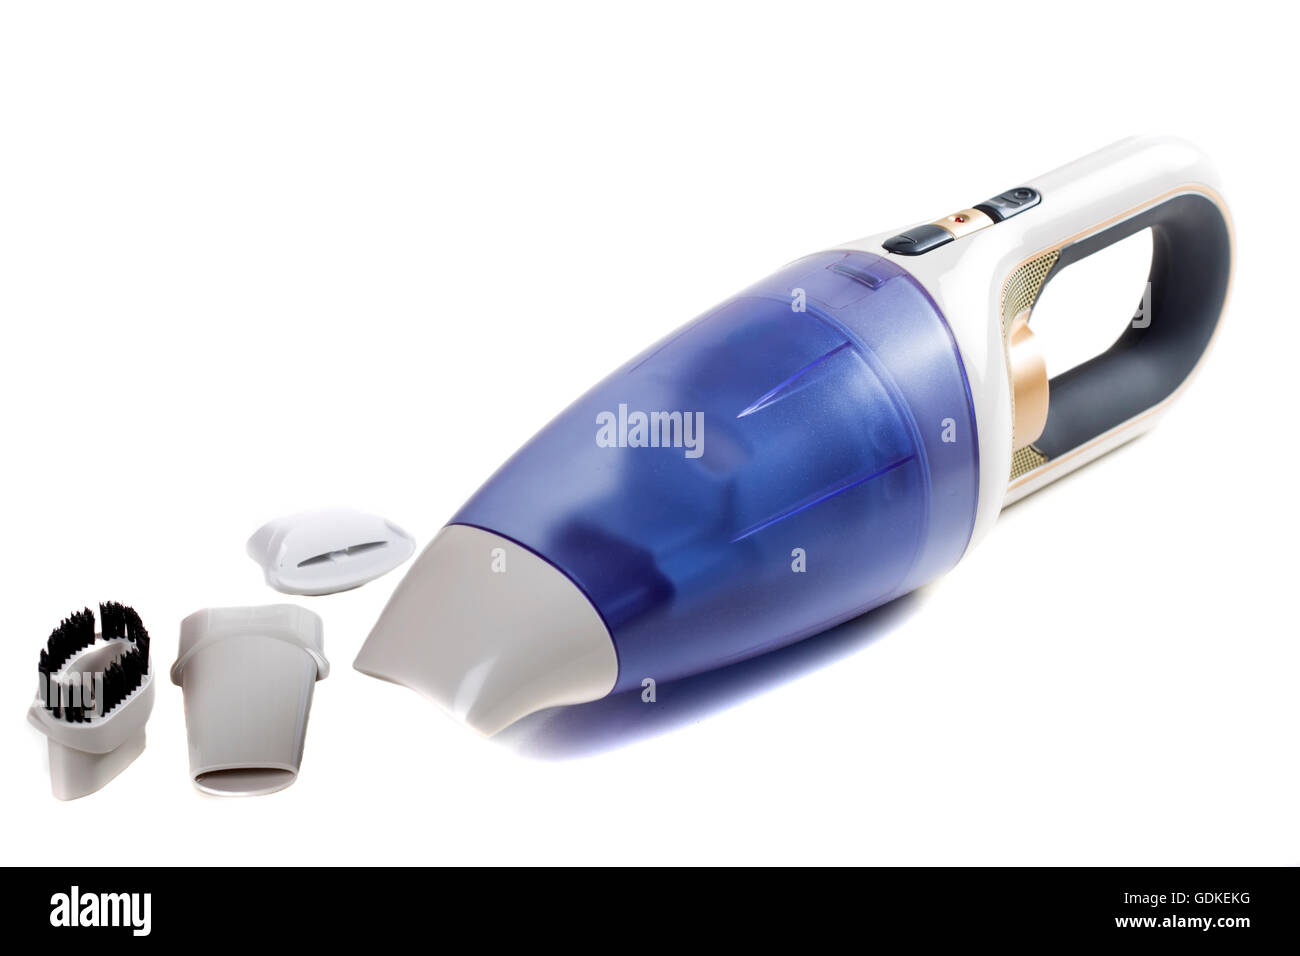 Hand-held vacuum cleaner with accessories isolated on a white background Stock Photo